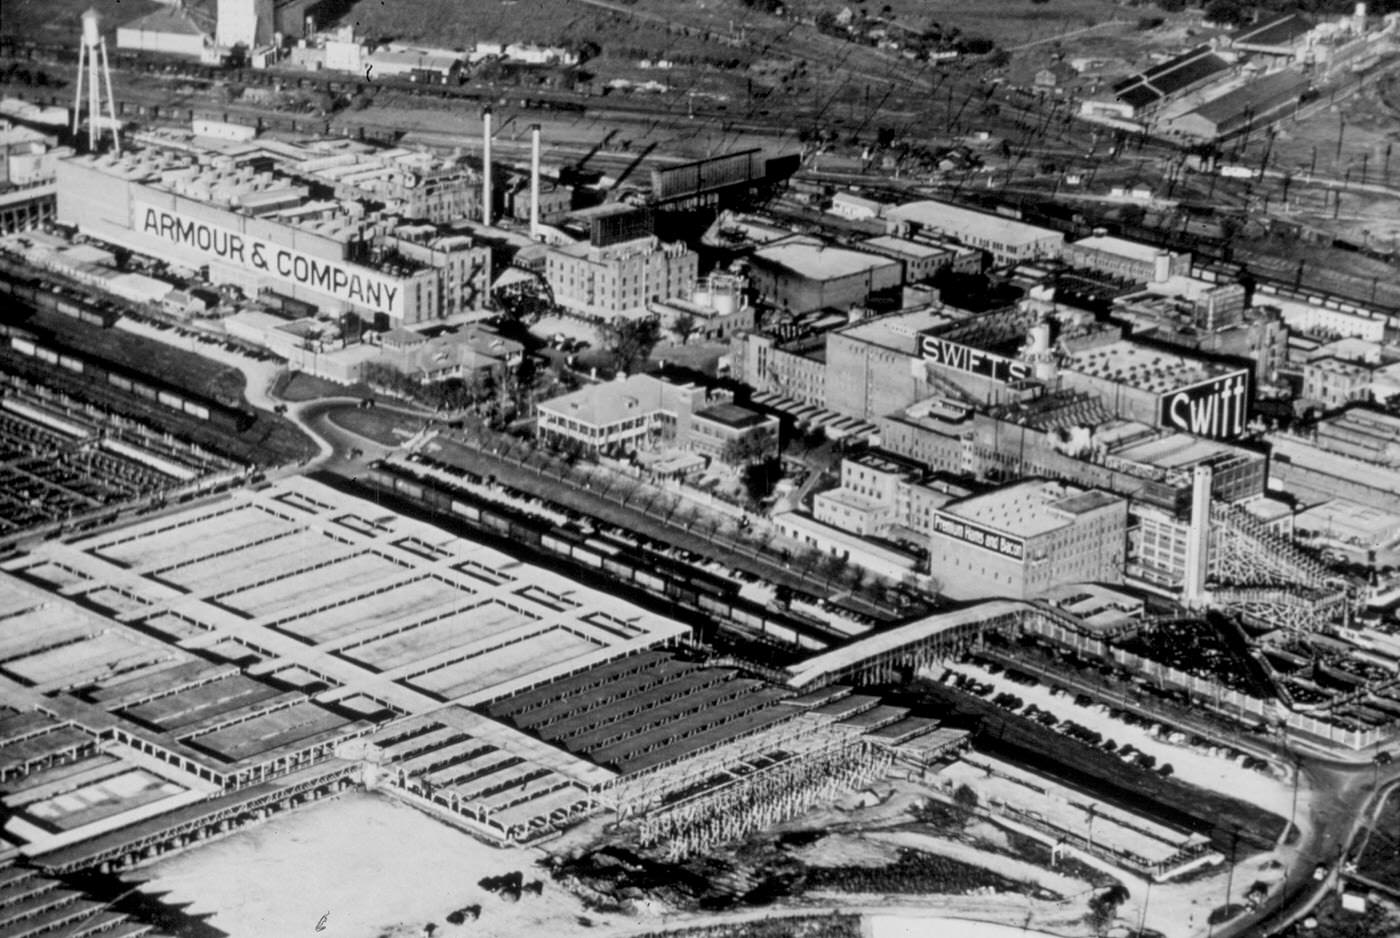 Armour and Swift meat packing plants in the Fort Worth Stockyards, 1940